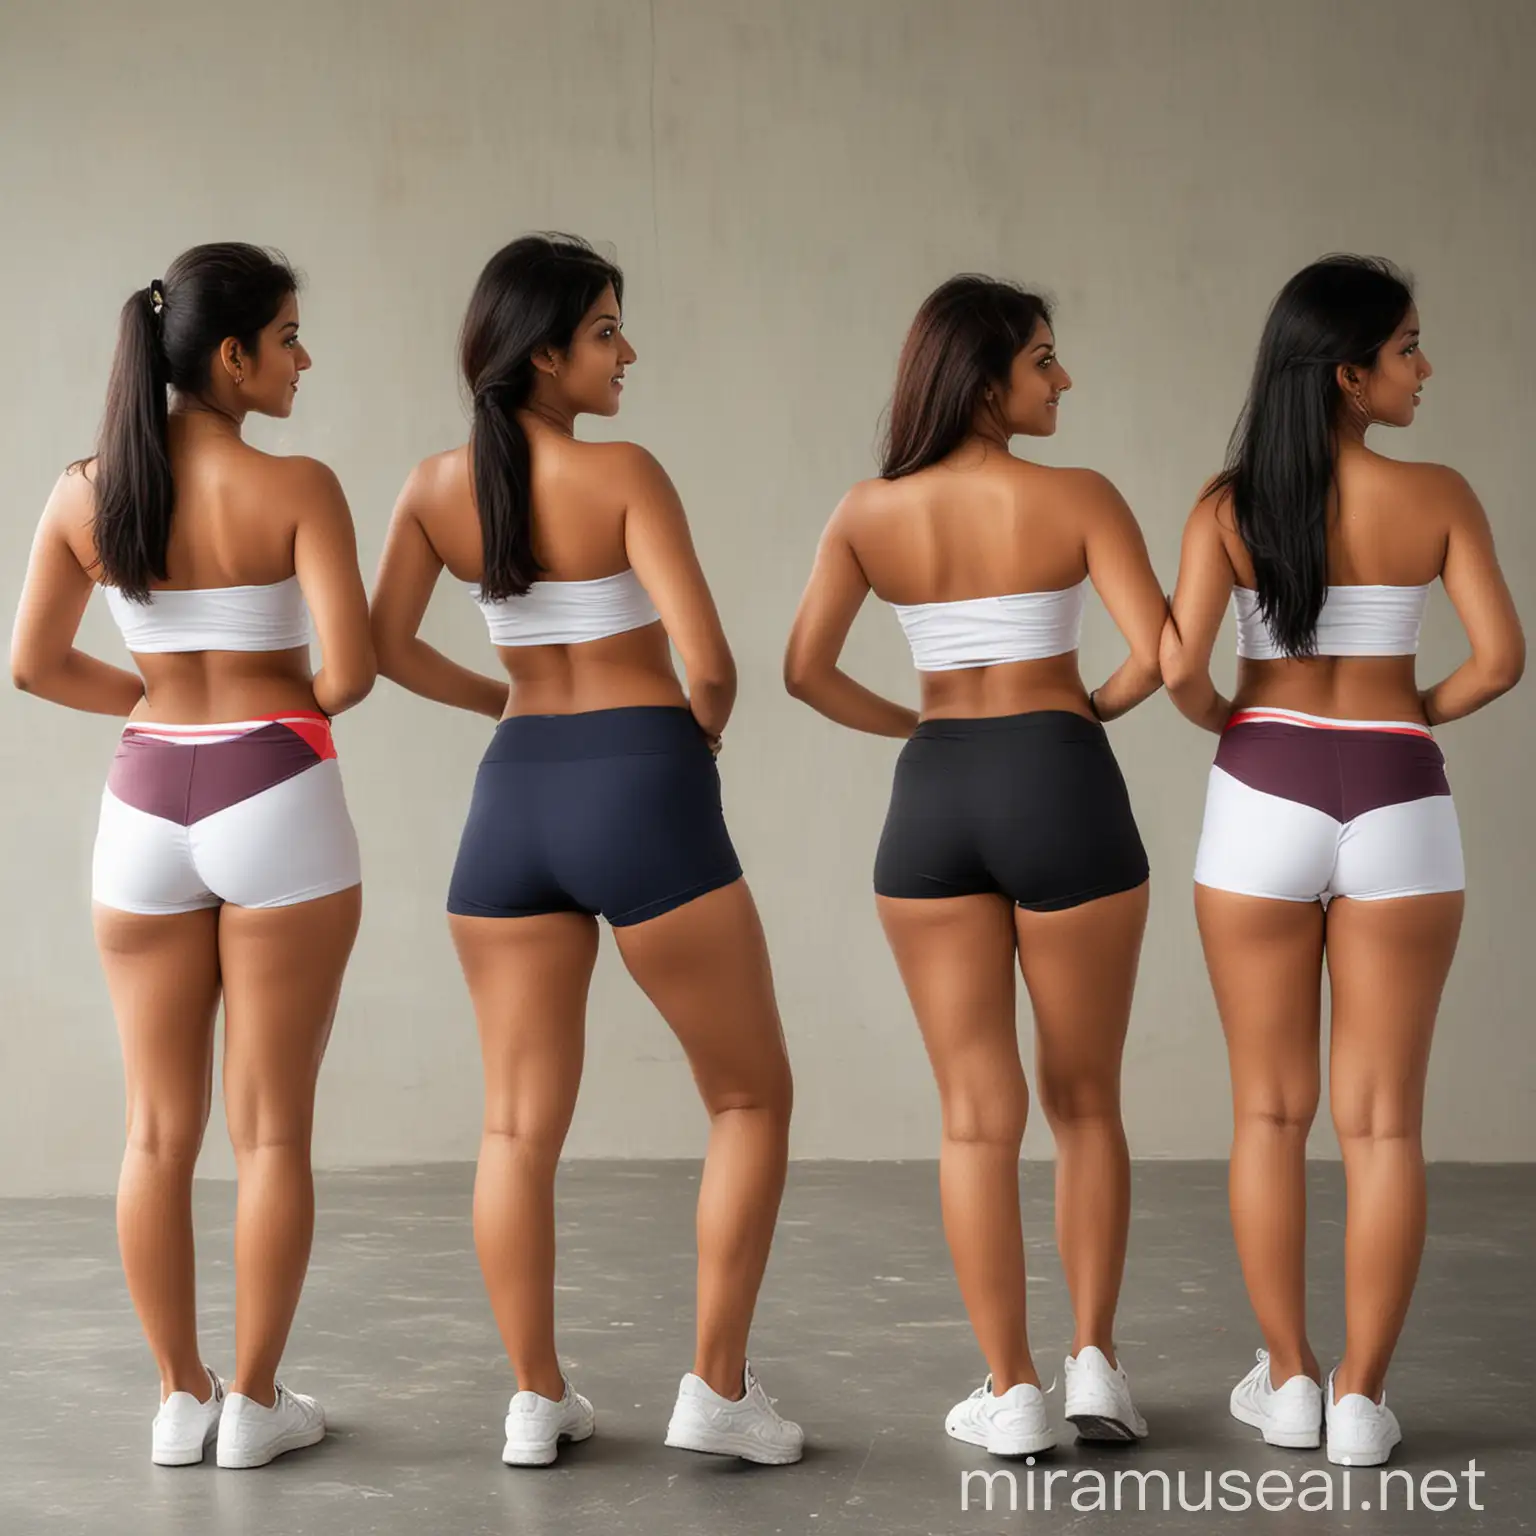 Indian Girls in Stylish Cycling Shorts Pose from Behind